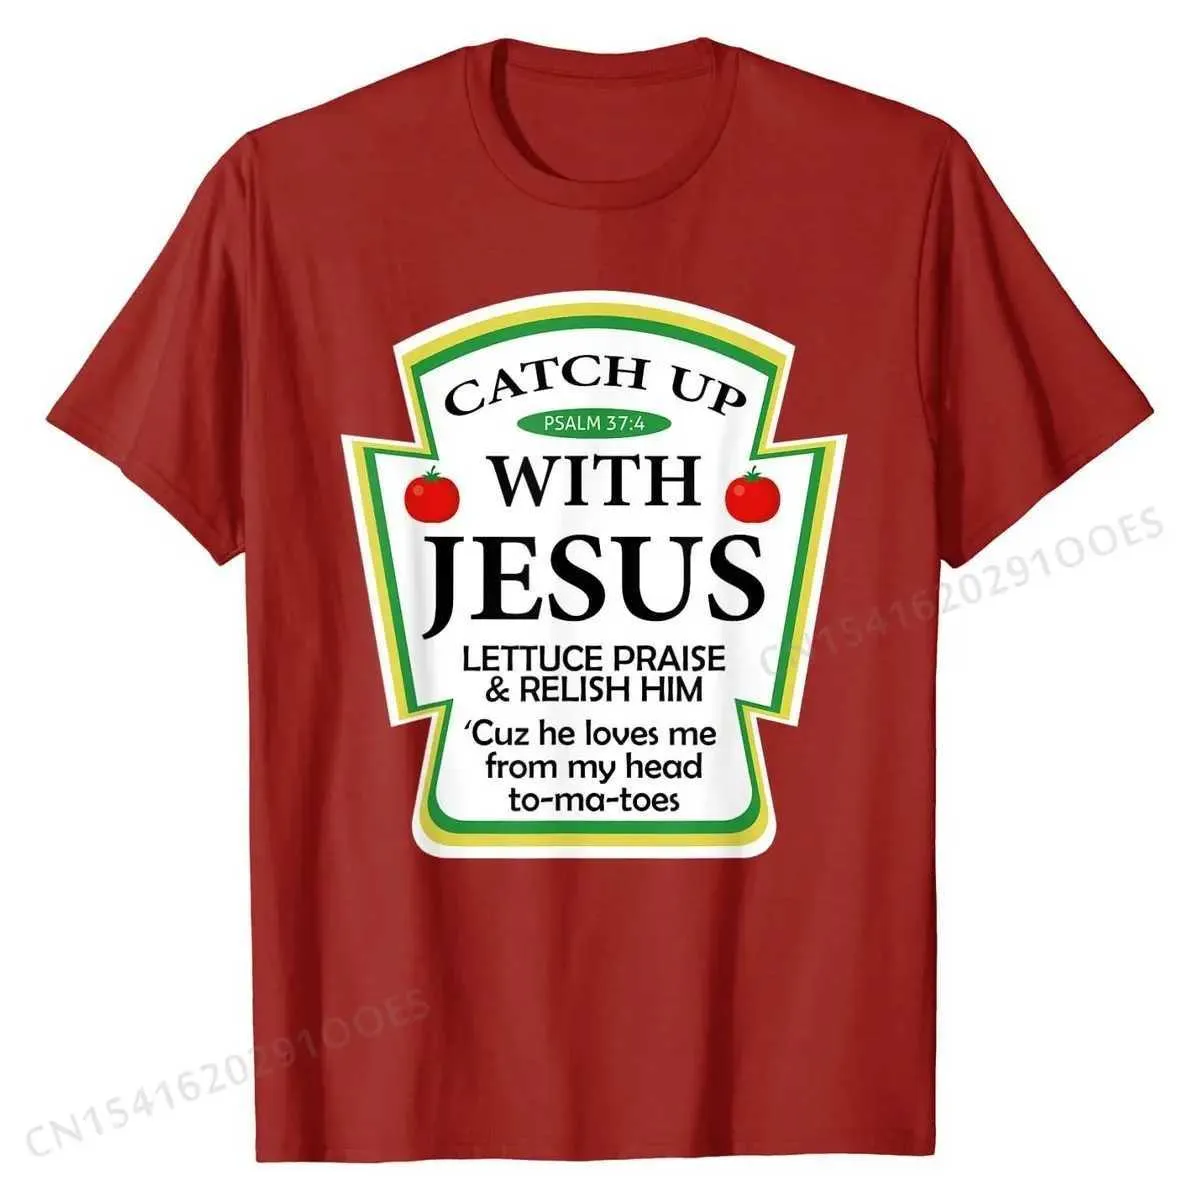 Men's T-Shirts Catchup With Jesus Shirt Funny Christian Gift T-Shirt Cute Personzed Top T-shirts Cotton Men Tops Shirts Personzed T240425